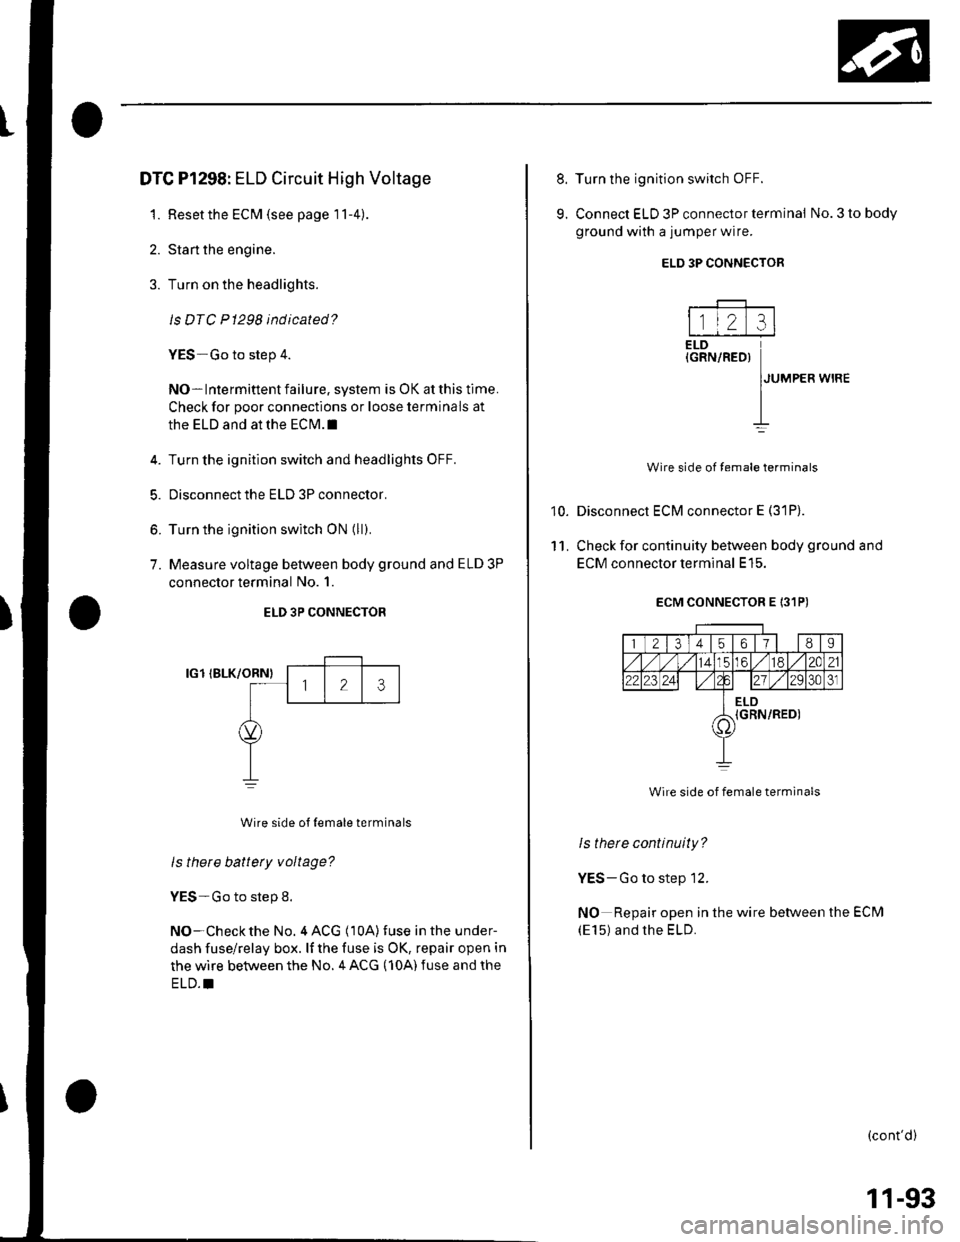 HONDA CIVIC 2003 7.G Service Manual DTC Pl298: ELD Circuit High Voltage
1. Resetthe ECM (see page 11-4)
2. Stan the engine.
3. Turn on the headlights.
ls DTC P1298 indicated?
YES-Go to step 4.
NO- Intermittent failure. system is OK at t